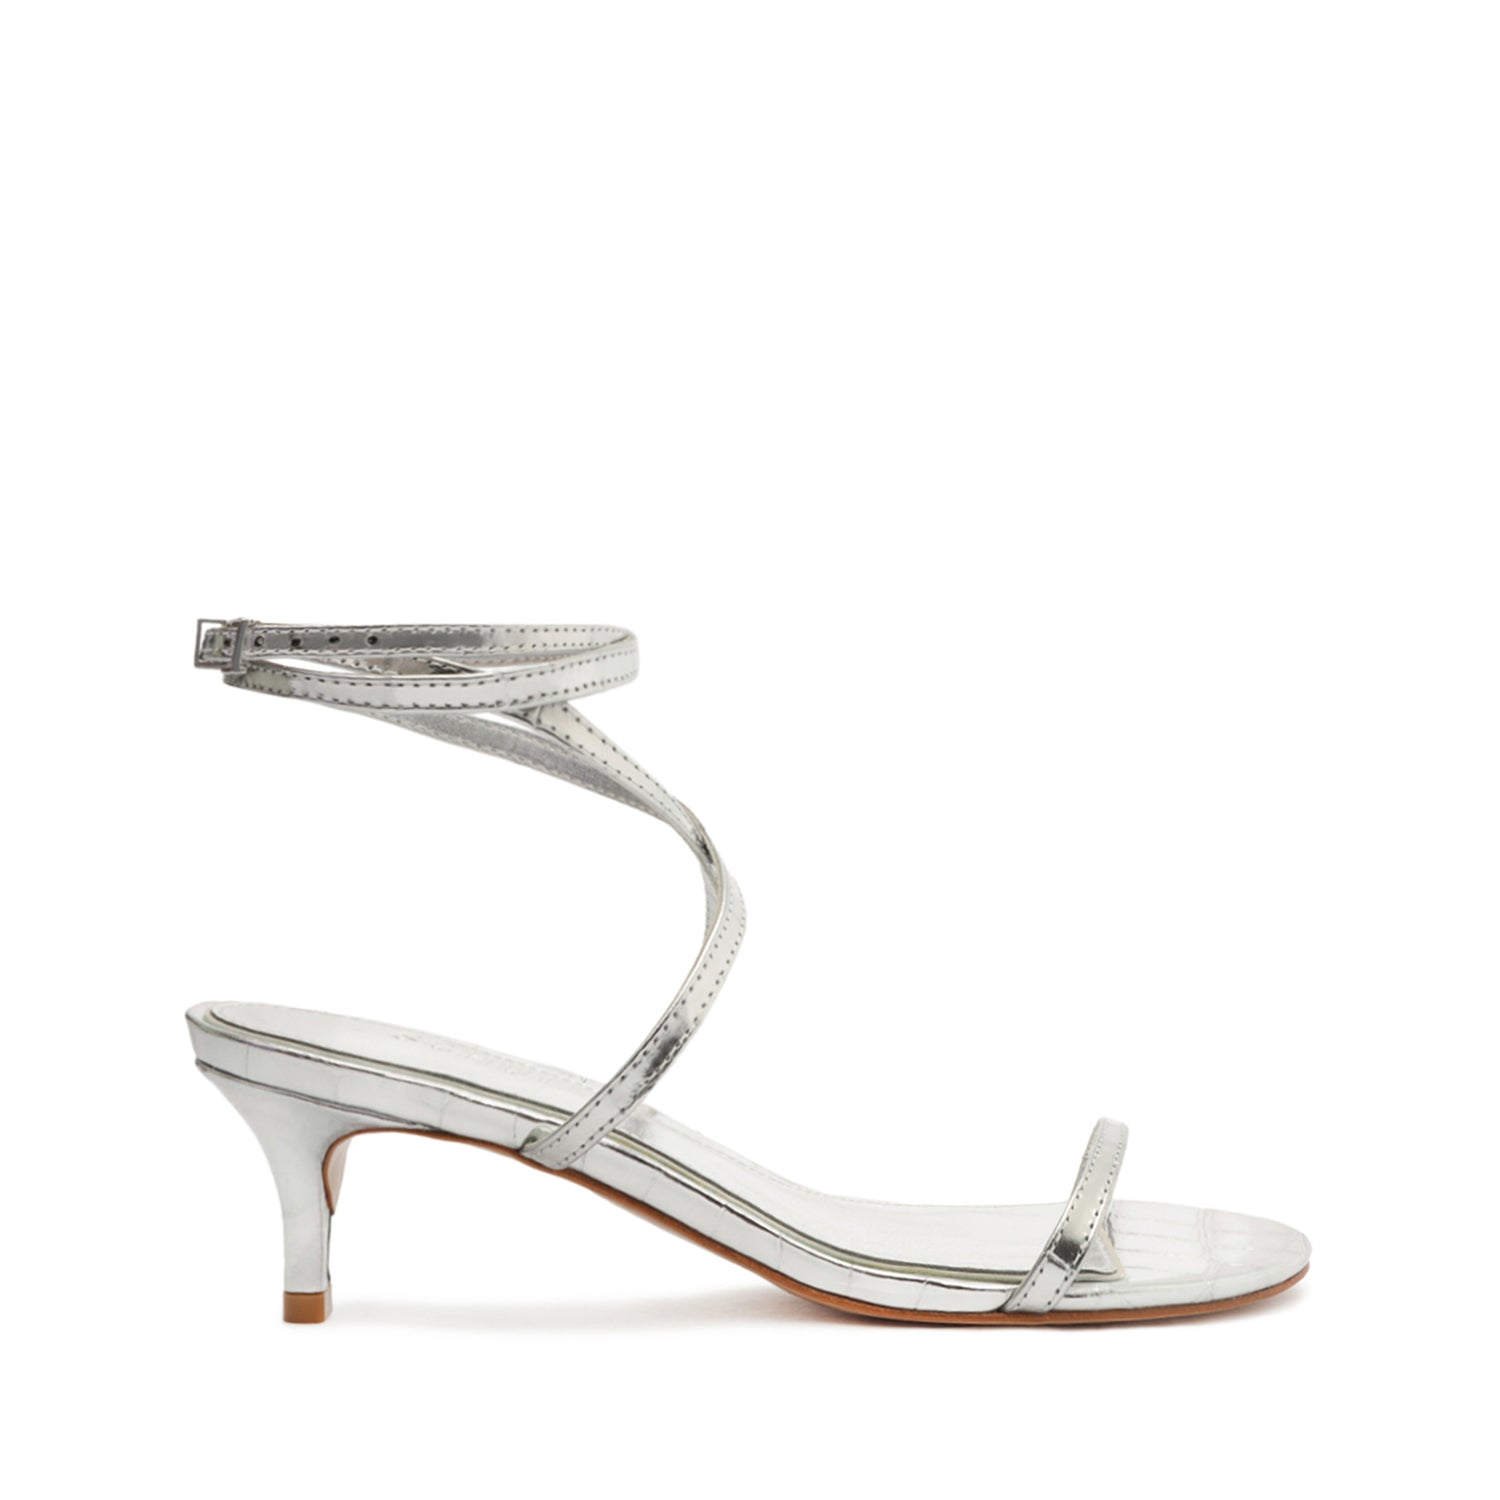 Sherry Leather Sandal Sandals FALL 23 5 Silver Leather - Schutz Shoes